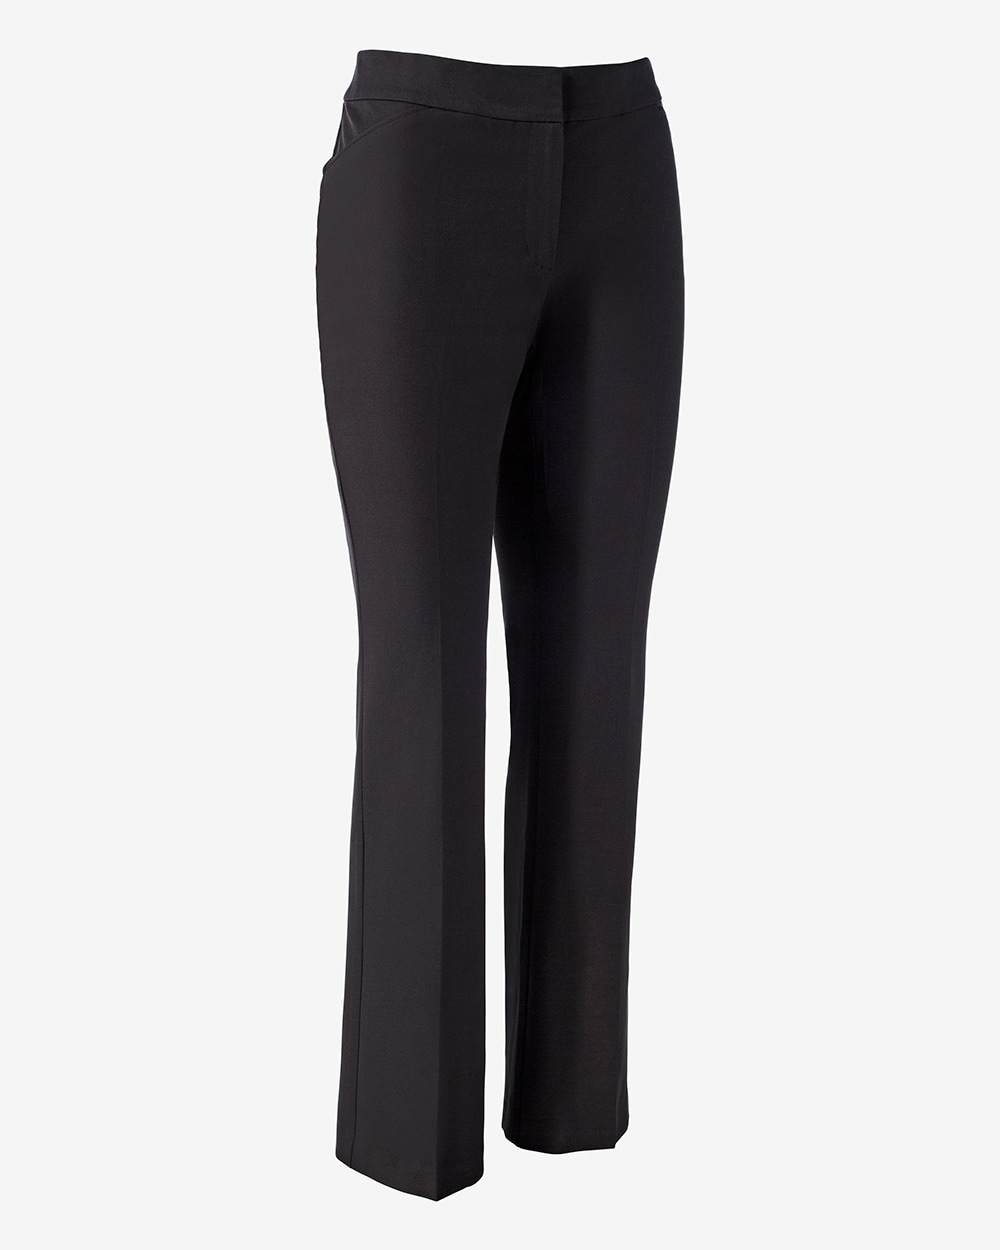 Fabulously Slimming 4-Way Stretch Trouser Pants